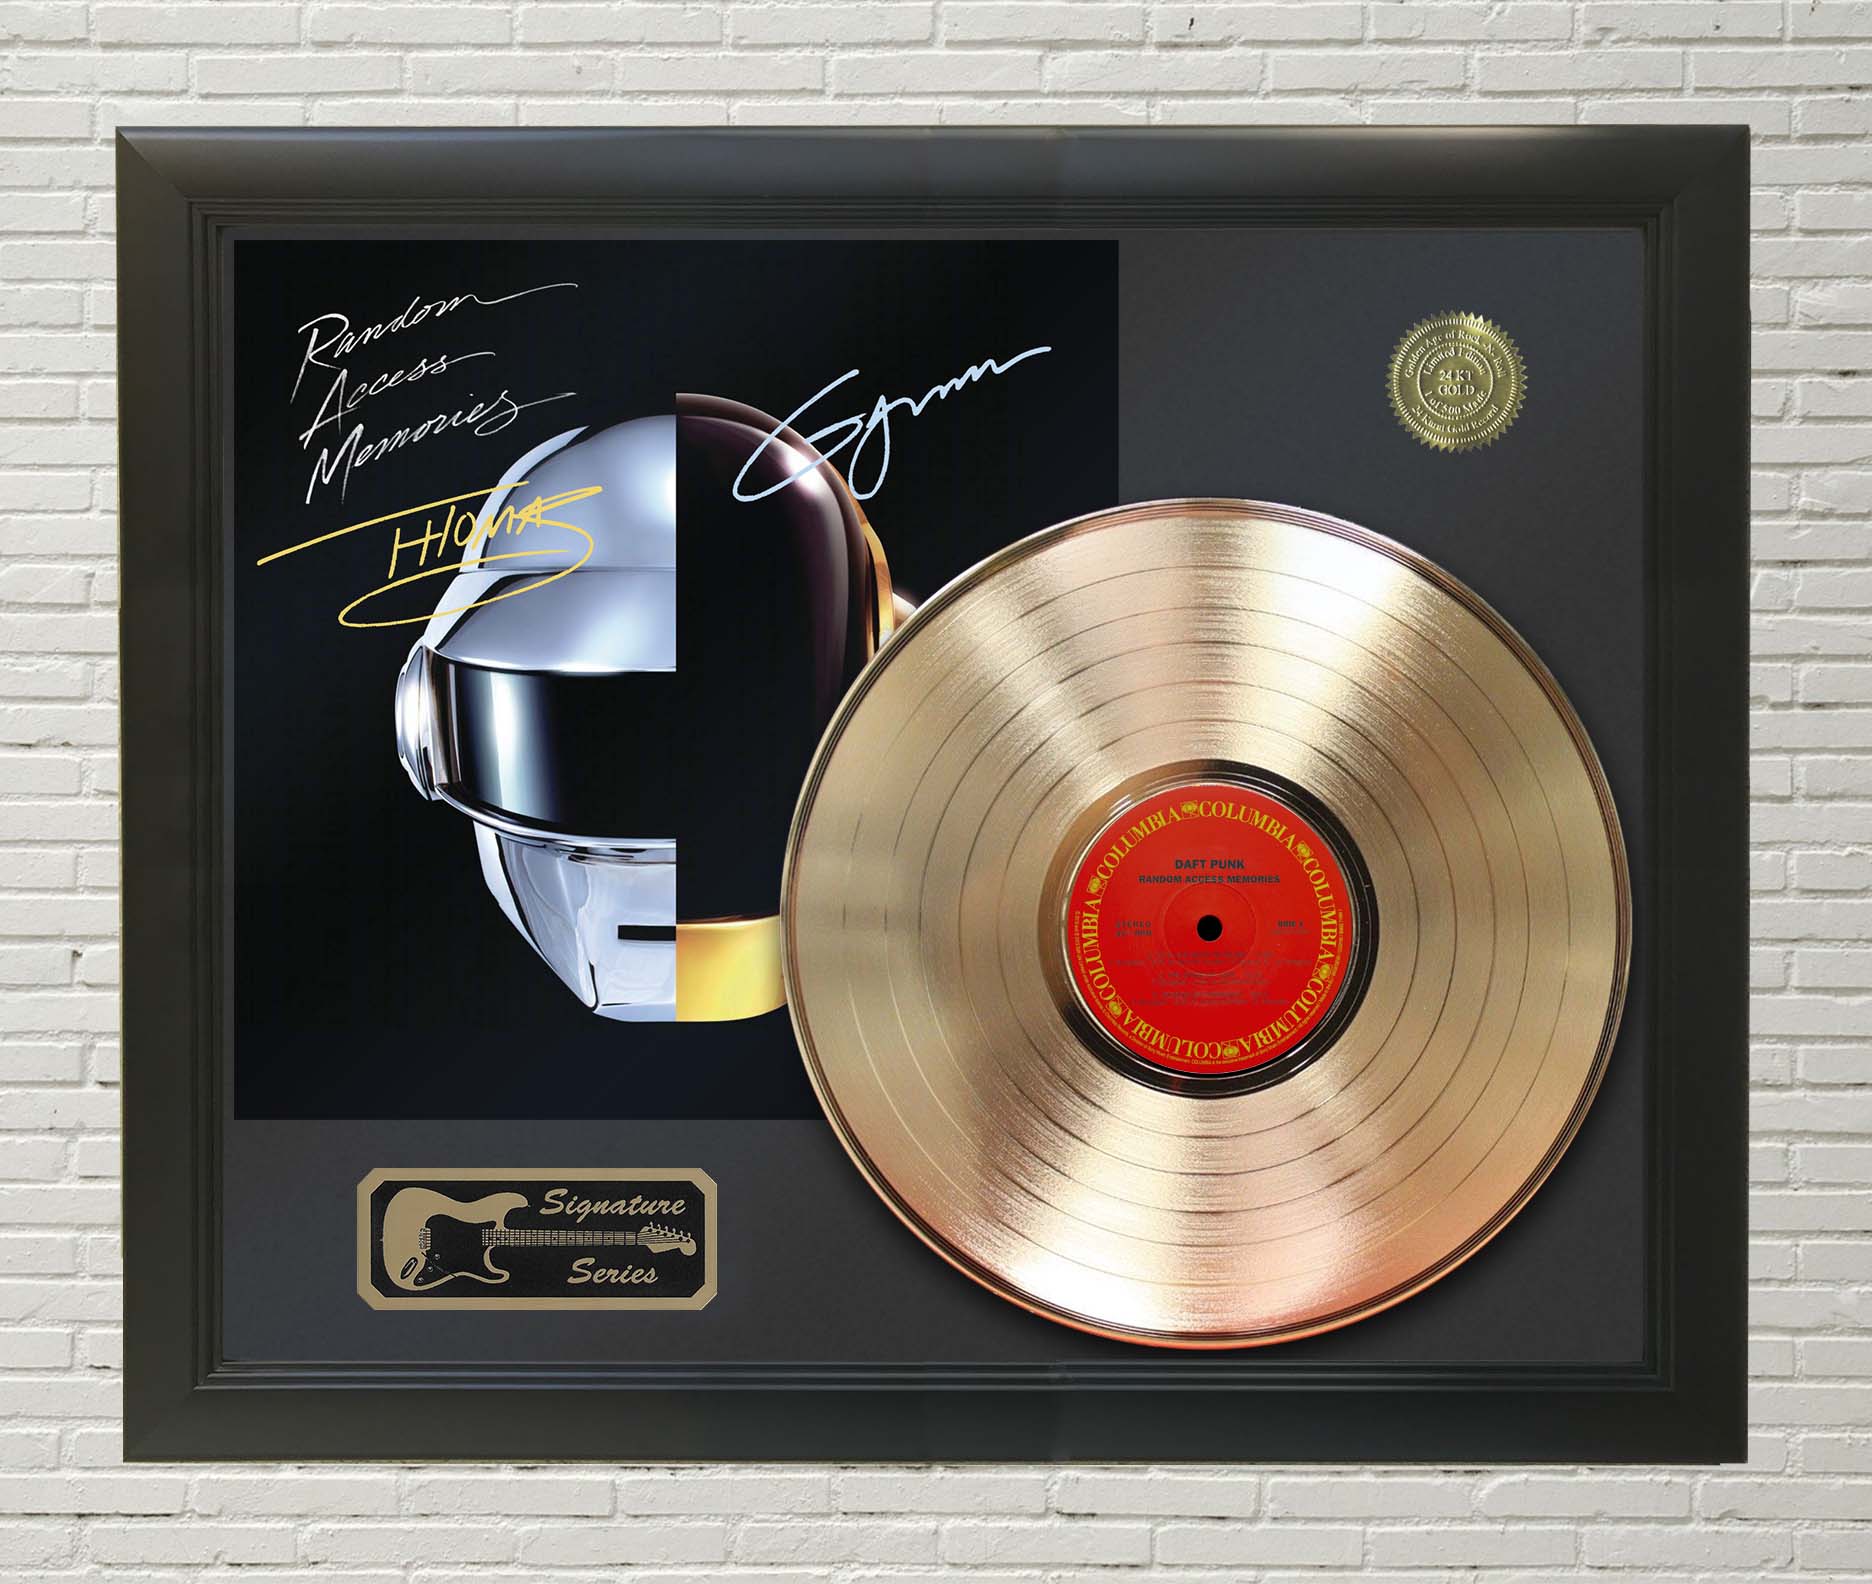 Daft Punk Random Access Memories Framed Signature Gold LP Record Display  M4 Gold Record Outlet Album and Disc Collectible Memorabilia